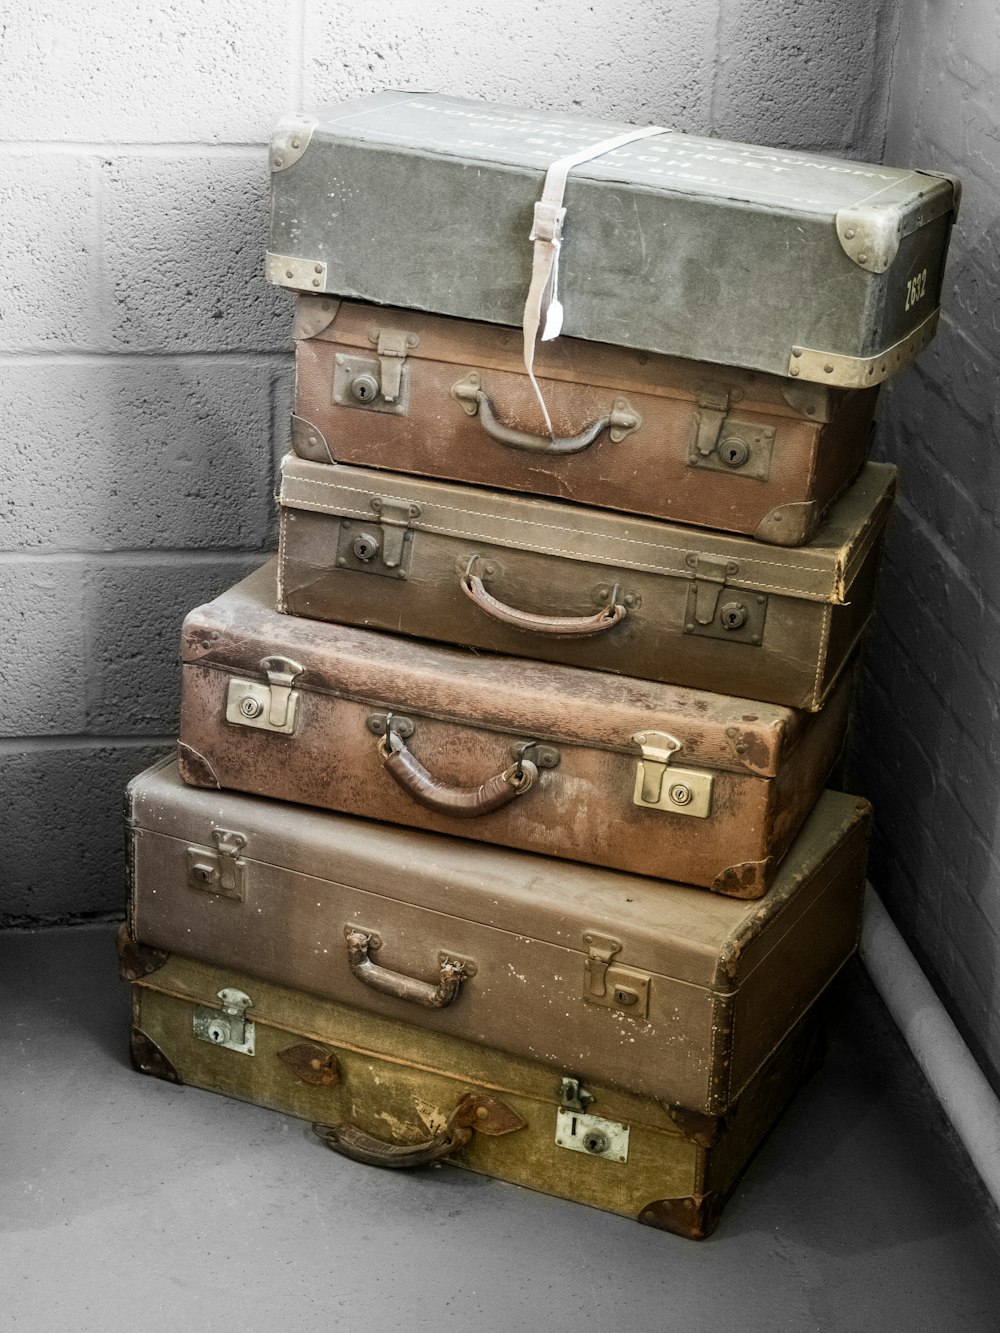 a stack of suitcases sitting next to a brick wall